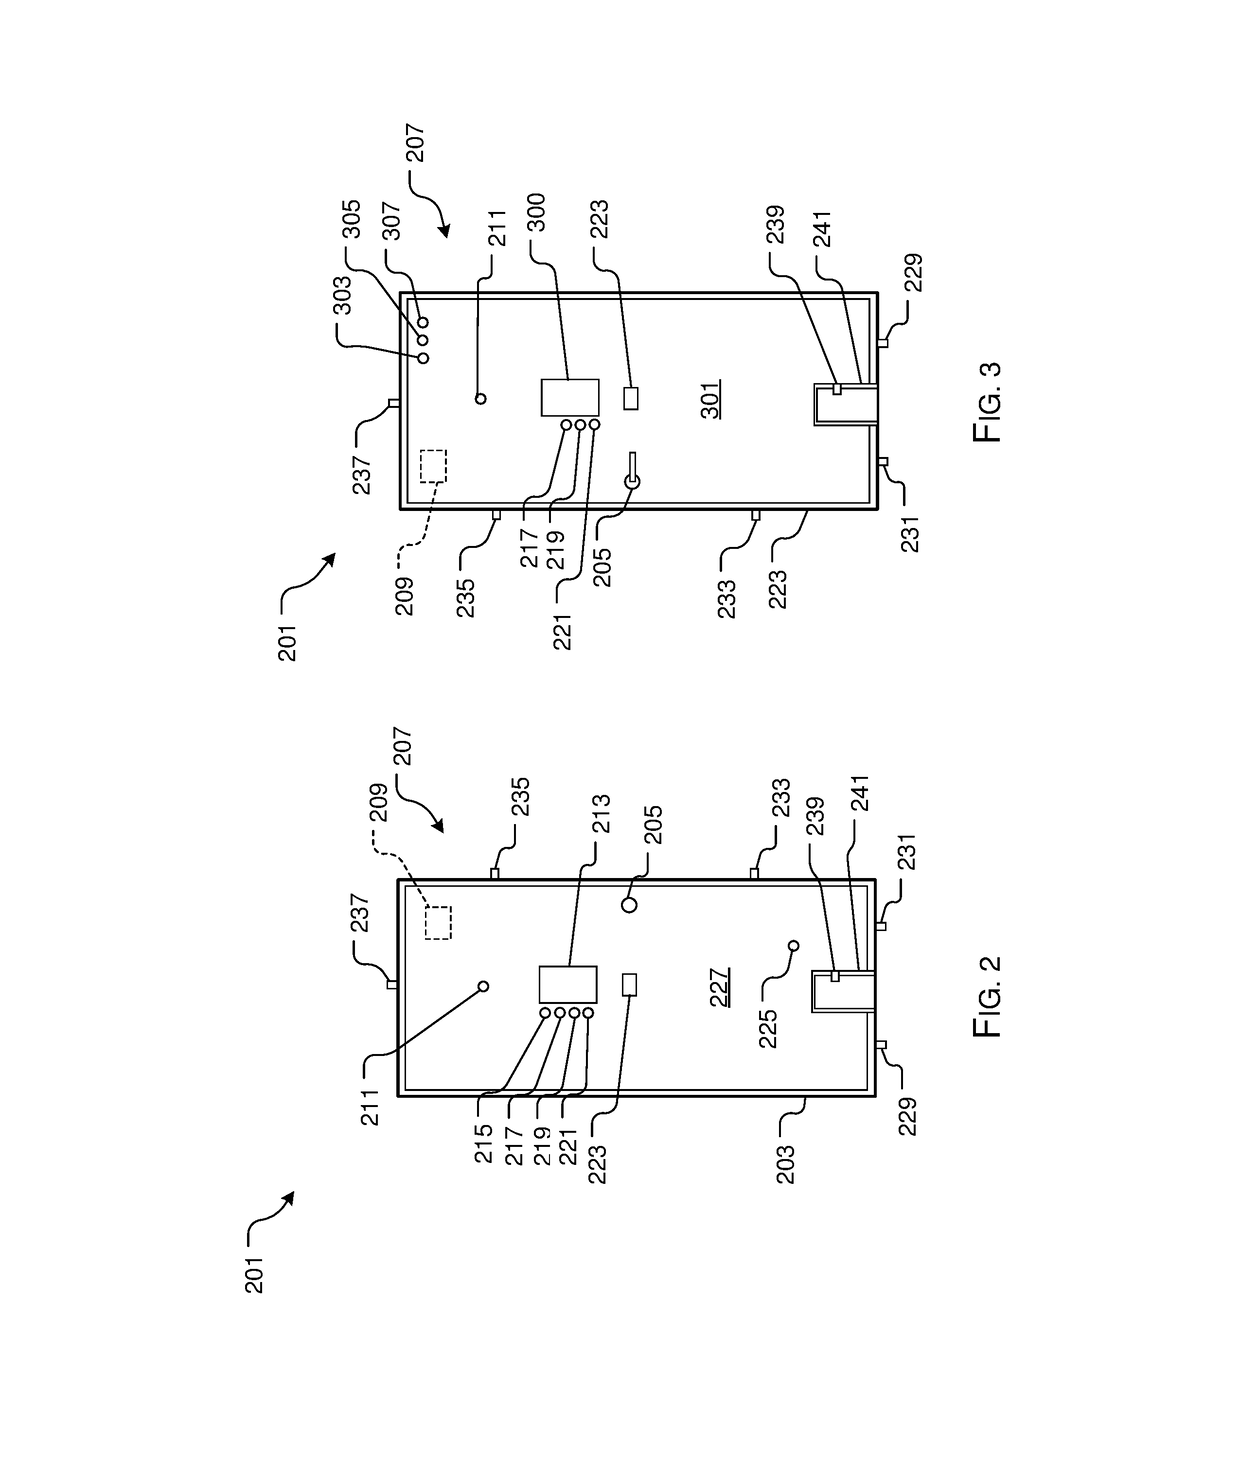 Smart door system and method of use